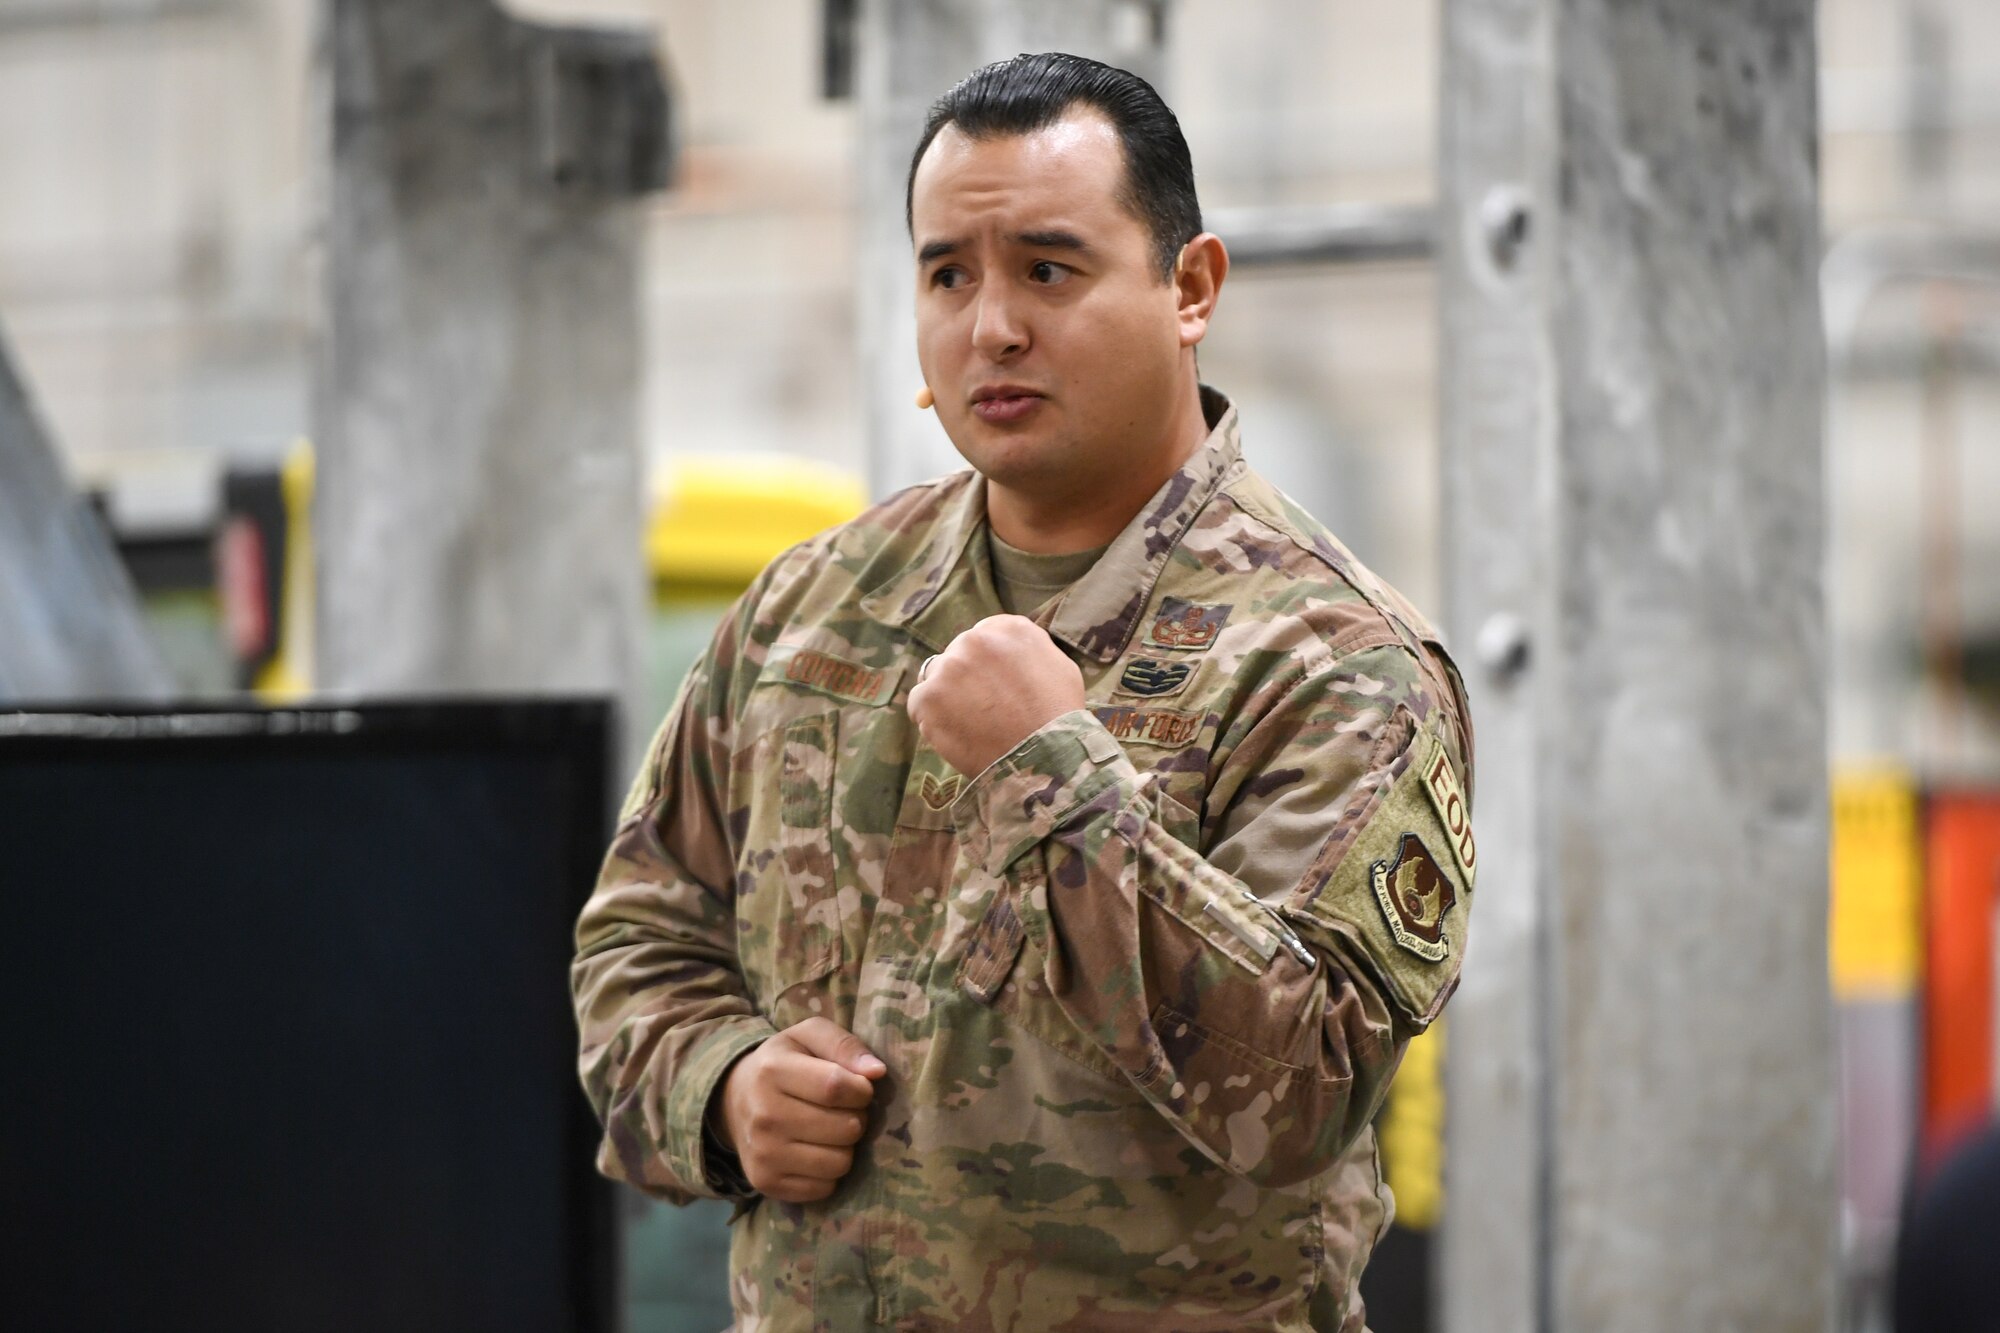 Staff Sgt. Guadalupe Corona, 775th Civil Engineer Squadron Explosive Ordnance Disposal Flight, speaks at the TEDx salon event held at Hill Air Force Base, Utah, Oct. 17, 2019. Corona relayed his challenging experiences as an EOD technician and how he knew when to take ownership of his mental wellness breaking the mold and the stigma. (U.S. Air Force photo by Cynthia Griggs)